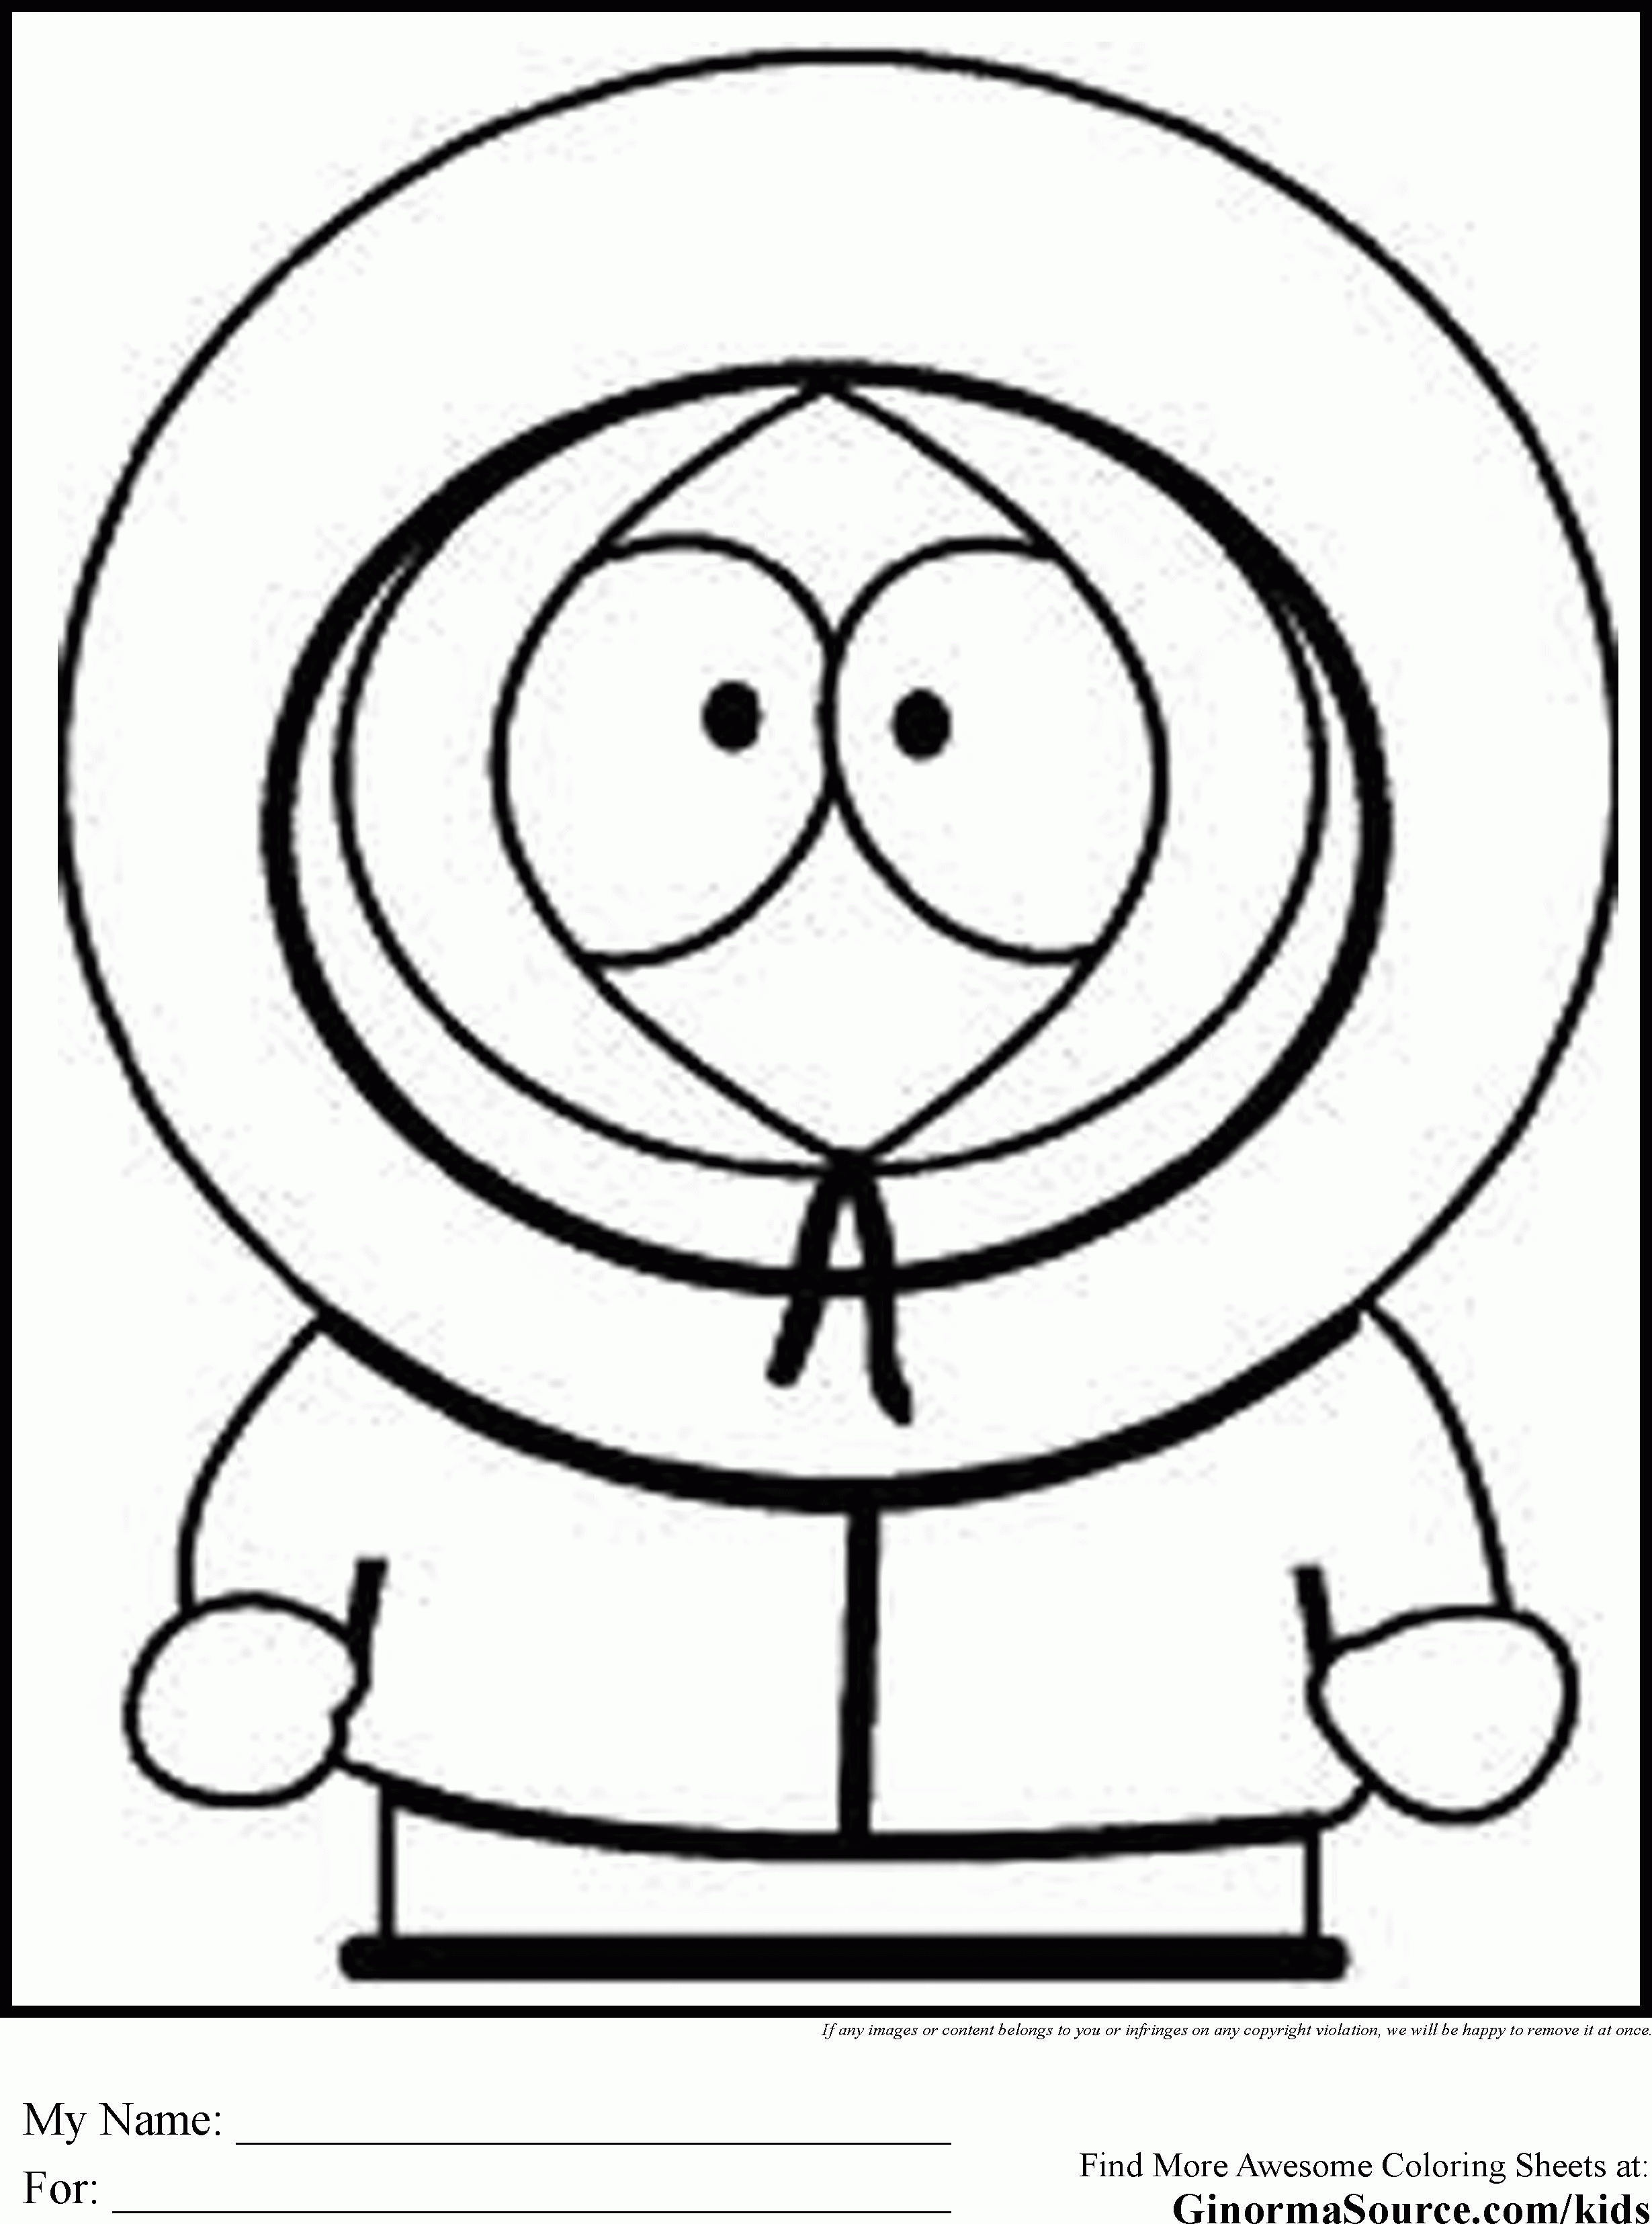 Southpark Coloring Pages For Teens | Coloring Pages | Coloring Pages - Free Printable South Park Coloring Pages